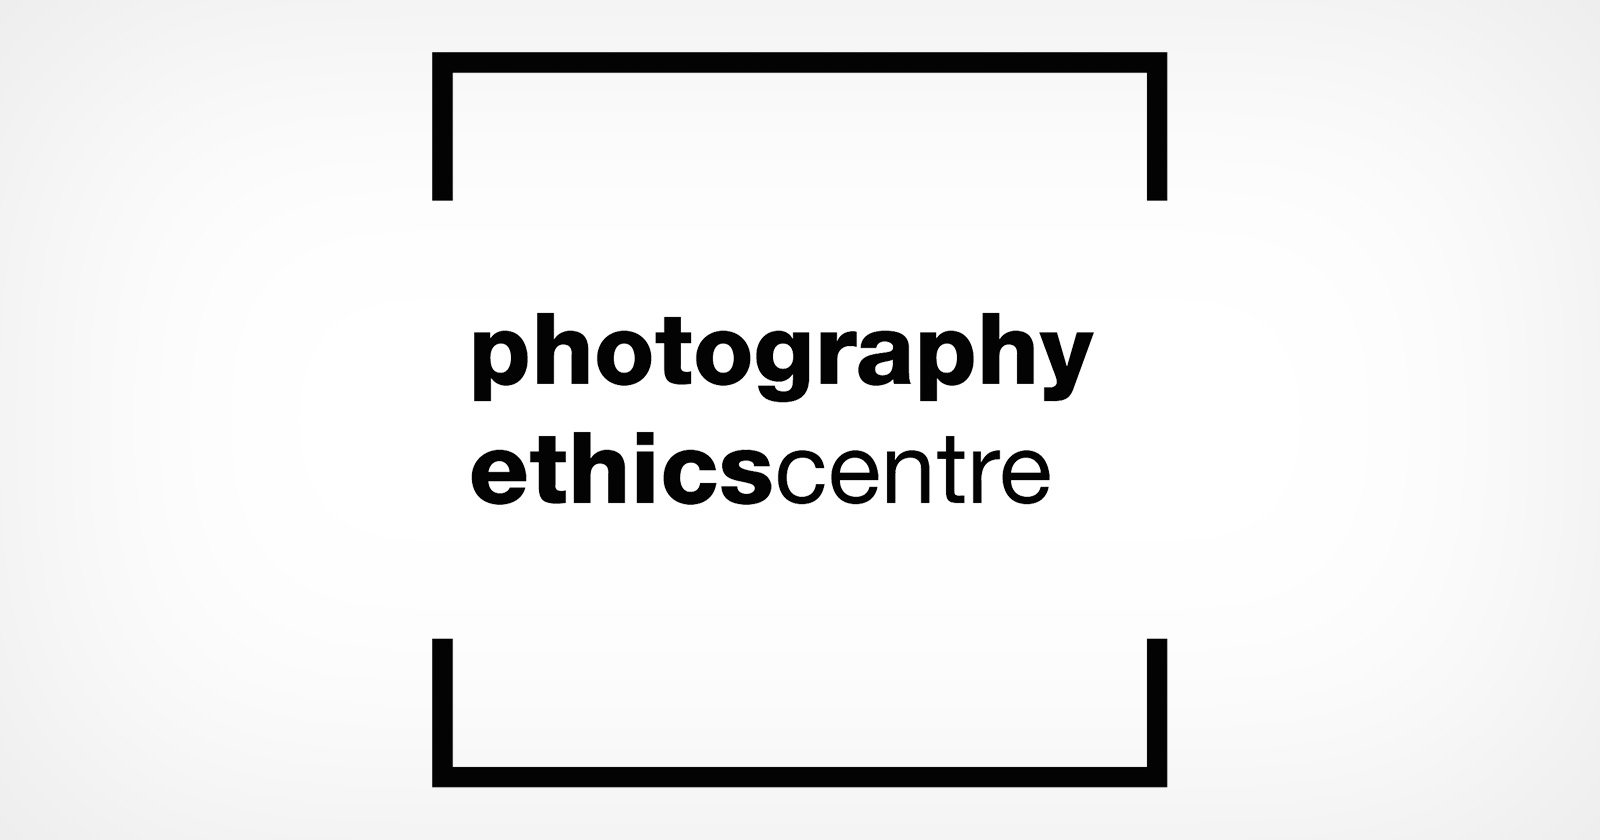 Ethics Center Desires All Photographers to Publish an Ethics Statement